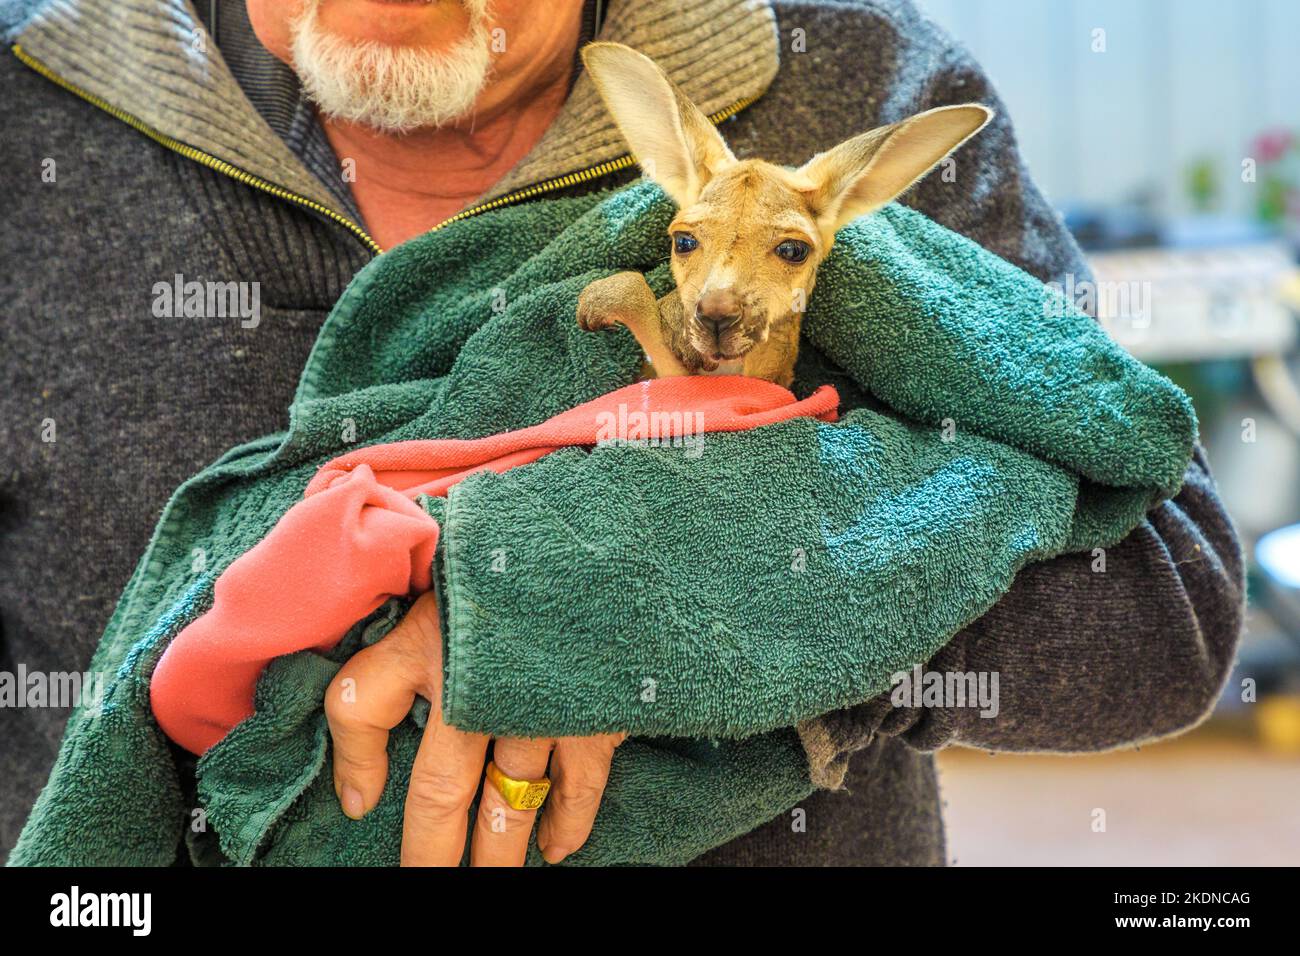 Coober Pedy, South Australia -Aug 27, 2019: A guided tour takes visitors and families to meet an orphaned kangaroo joey at Coober Pedy Kangaroo Stock Photo